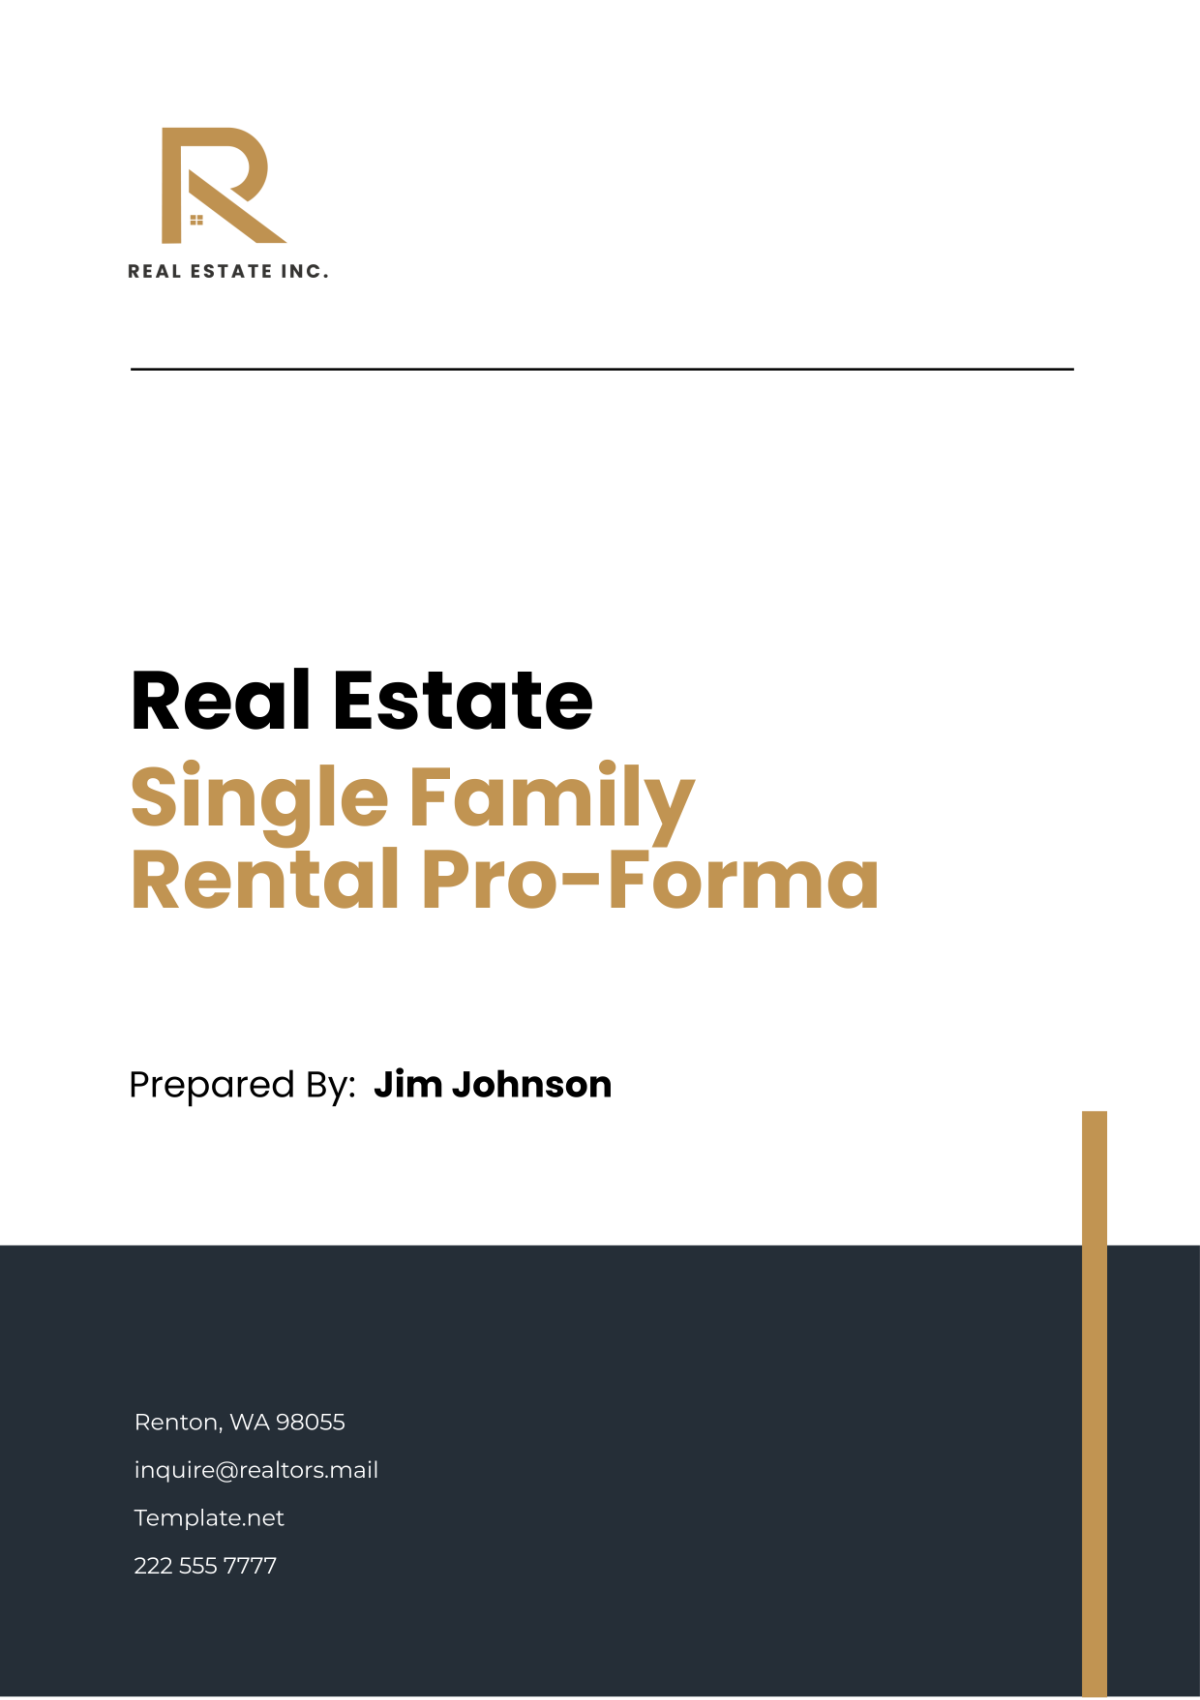 Real Estate Single Family Rental Pro-Forma Template